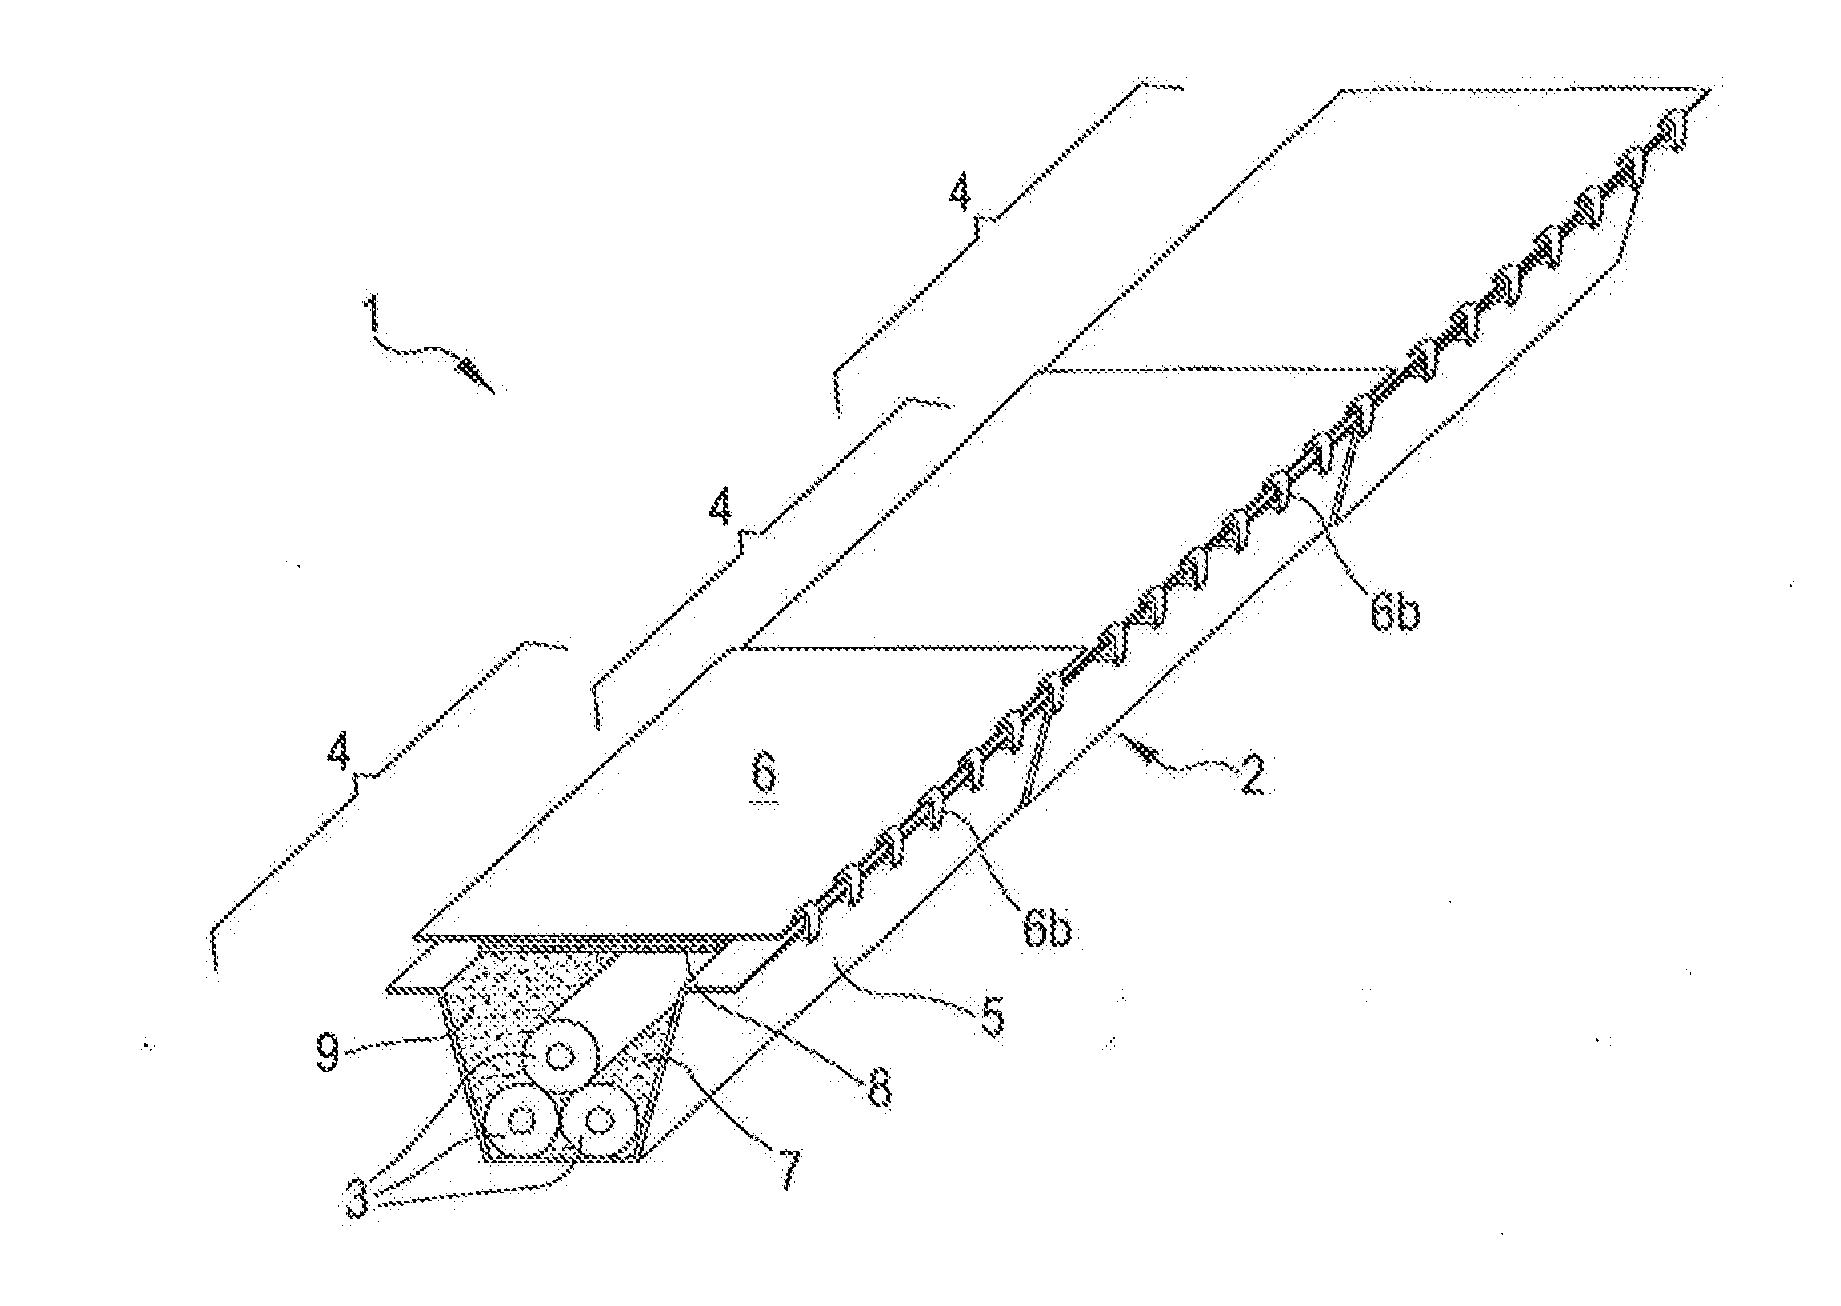 Electrical power transmission line comprising a corrosion-protected raceway and method of protecting a raceway from corrosion